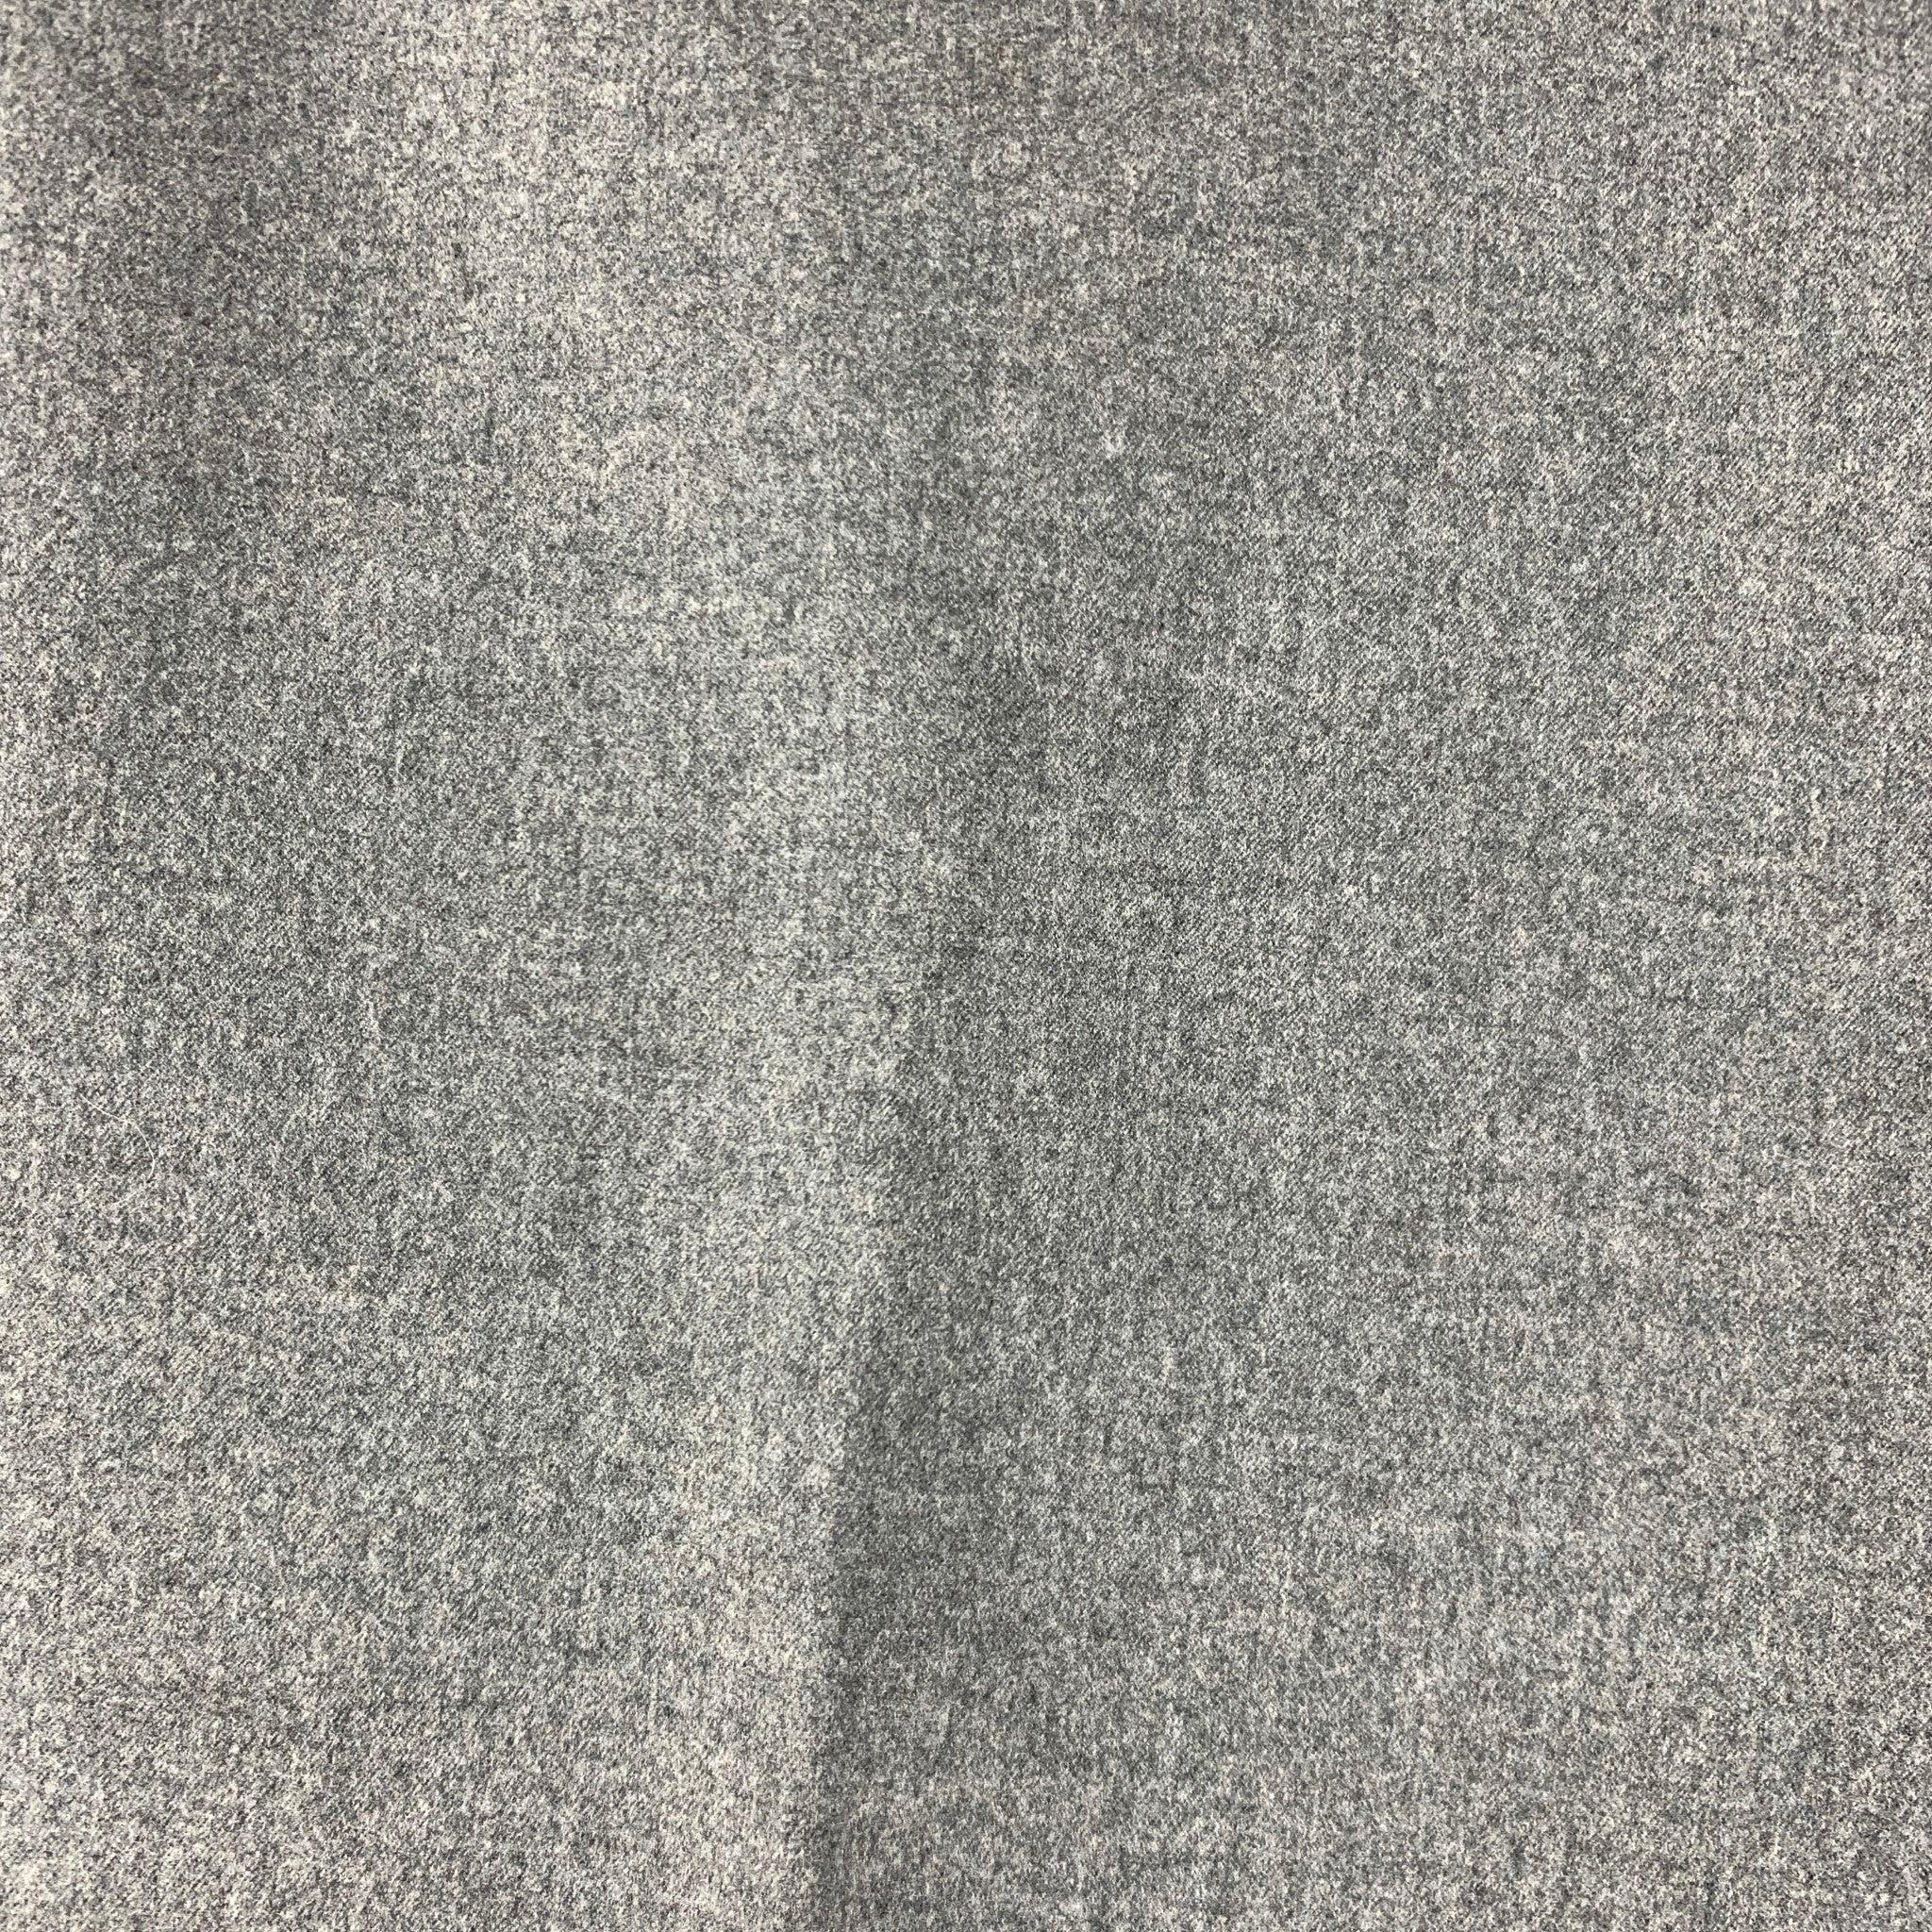 GIORGIO ARMANI
dress pants in a grey wool blend featuring a regular fit, and zipper fly closure. Made in Italy.Very Good Pre-Owned Condition. Minor signs of wear. 

Marked:  IT 50 

Measurements: 
 Waist: 34 inches Rise: 8.5 inches Inseam: 27 inches